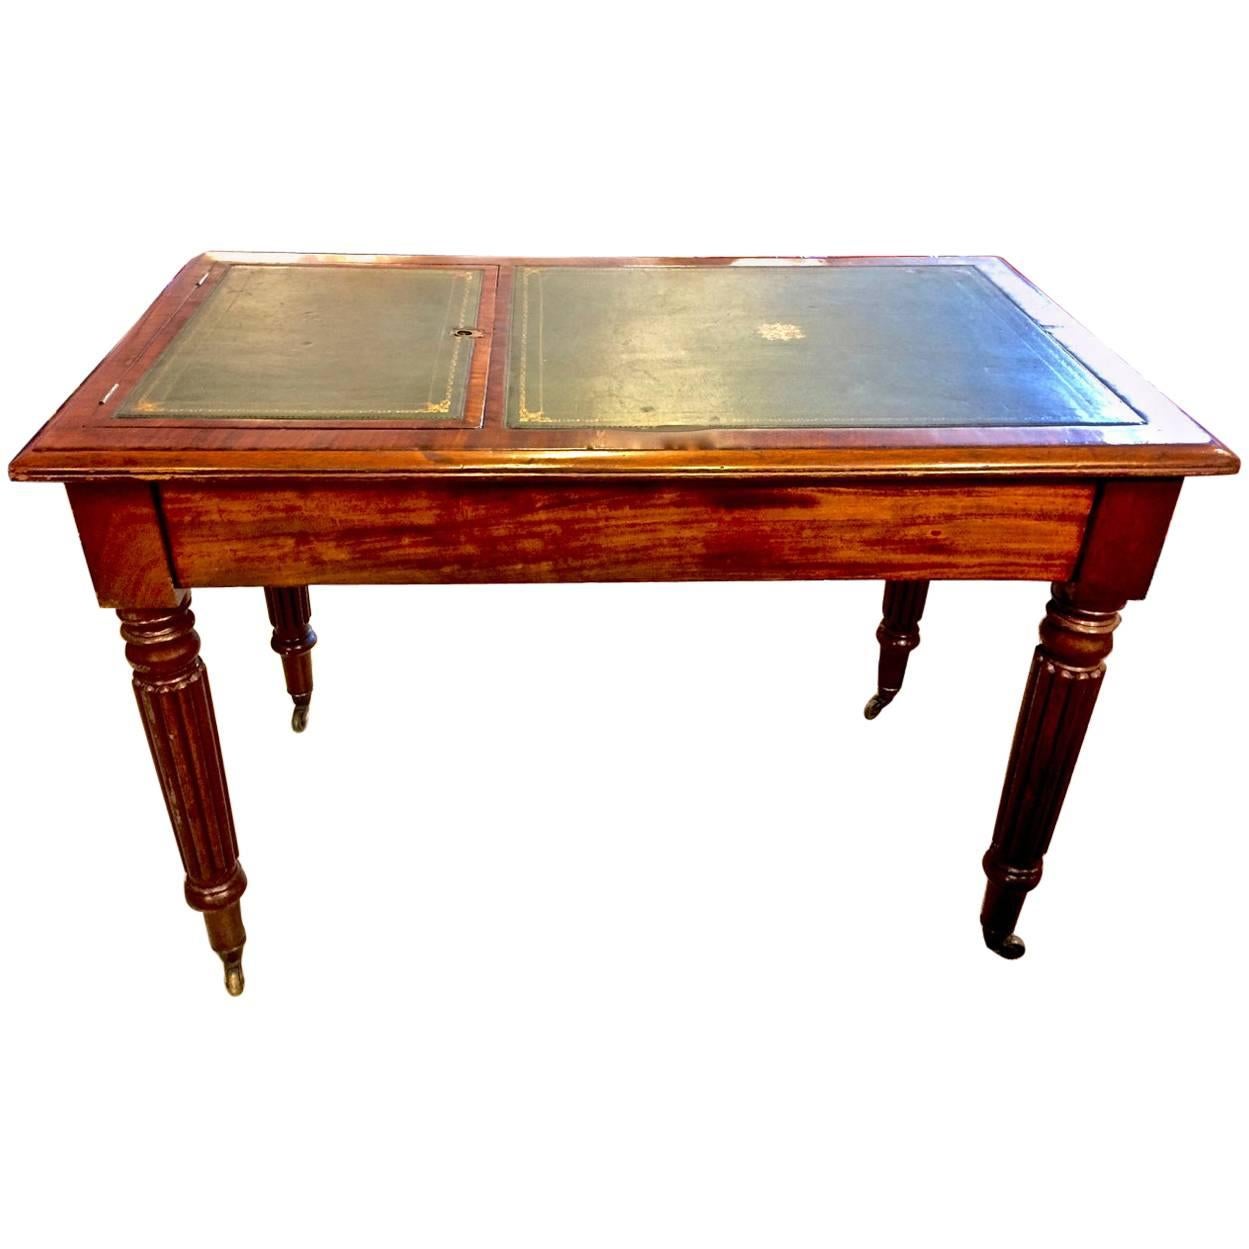 Regency or William IV Writing Table/Desk with Book Stand